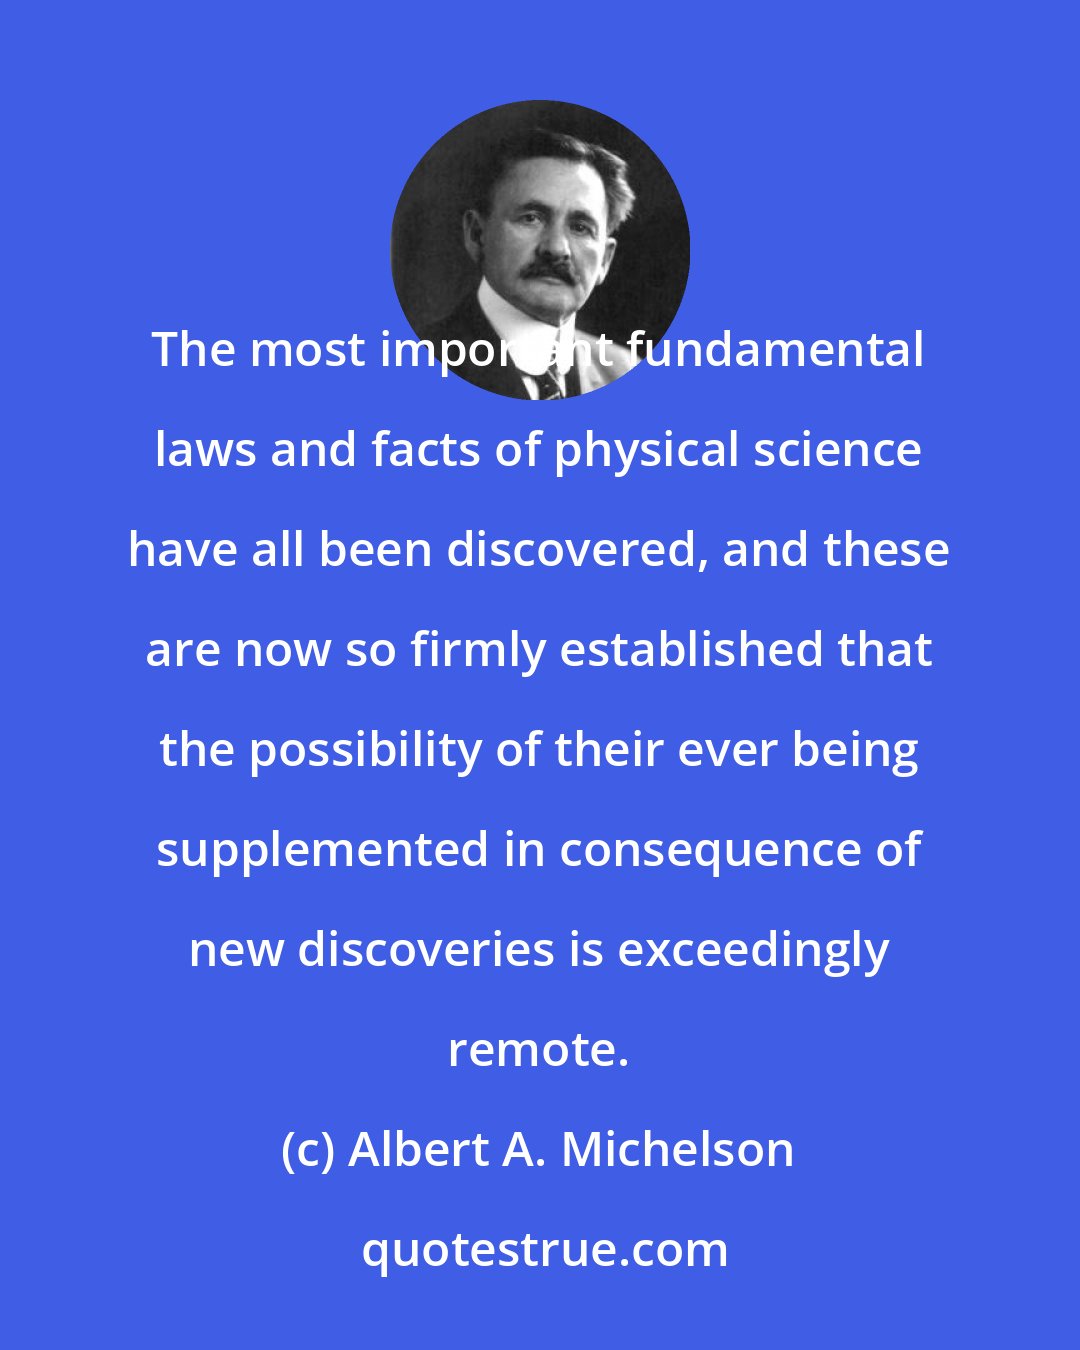 Albert A. Michelson: The most important fundamental laws and facts of physical science have all been discovered, and these are now so firmly established that the possibility of their ever being supplemented in consequence of new discoveries is exceedingly remote.